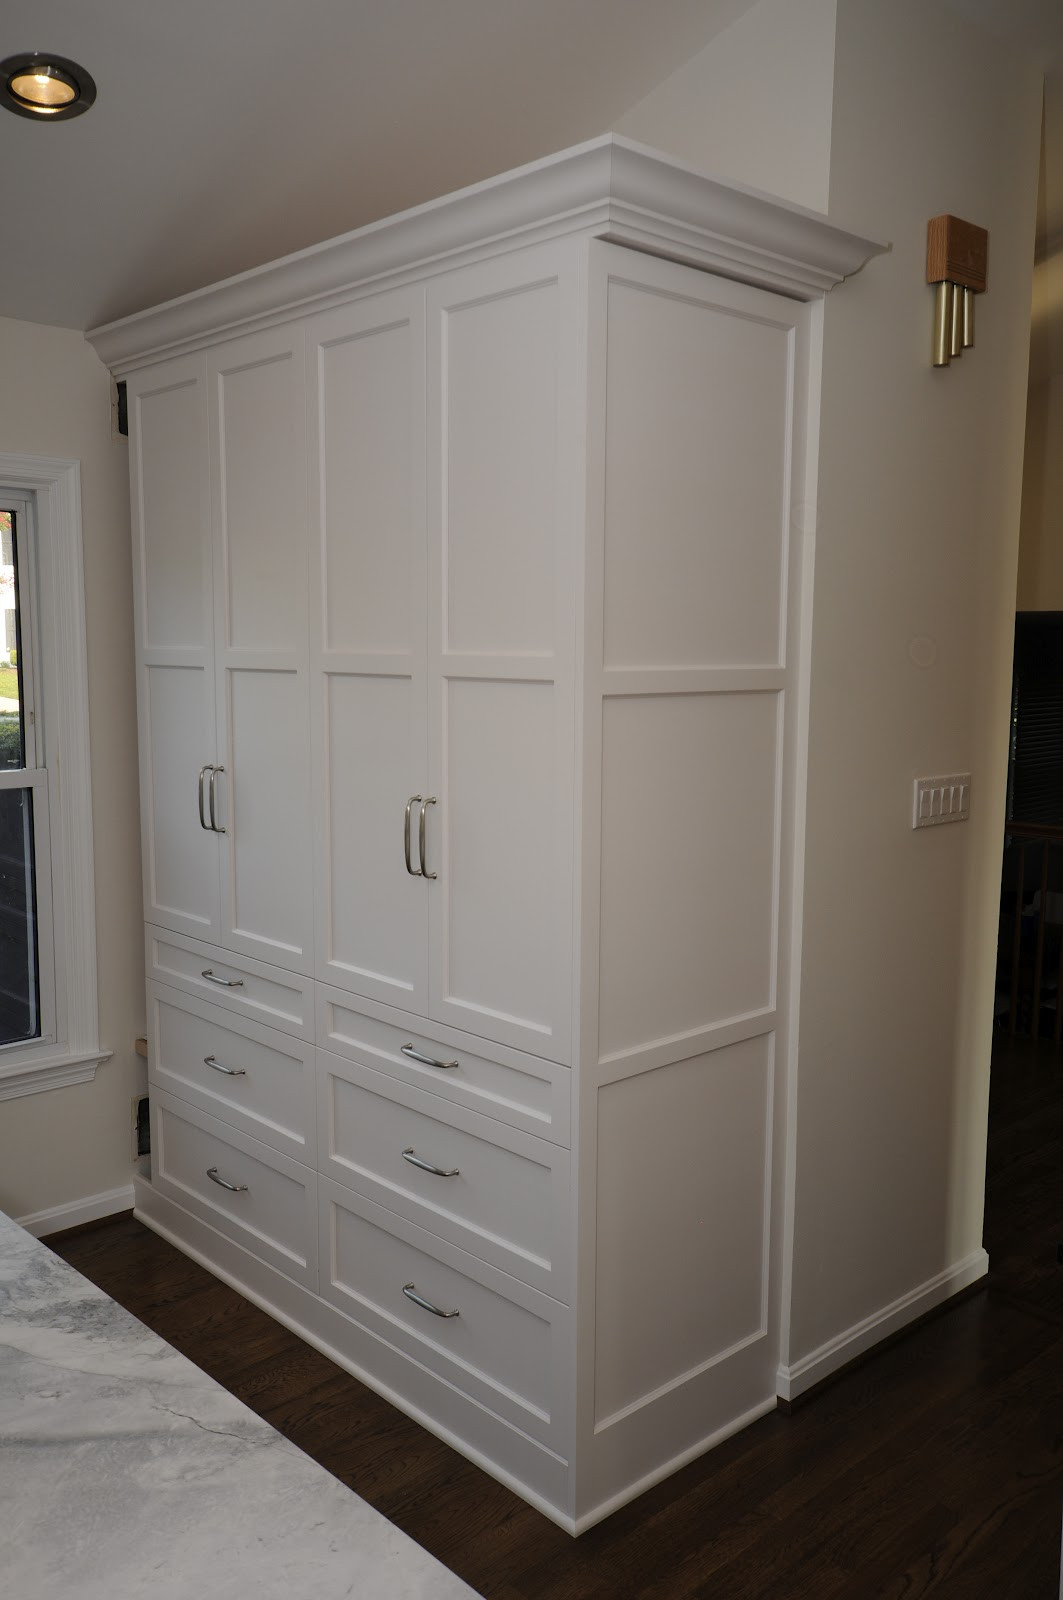 White Pantry Cabinets For Kitchen
 Cherry Hill Cabinetry Soapstone and White Painted